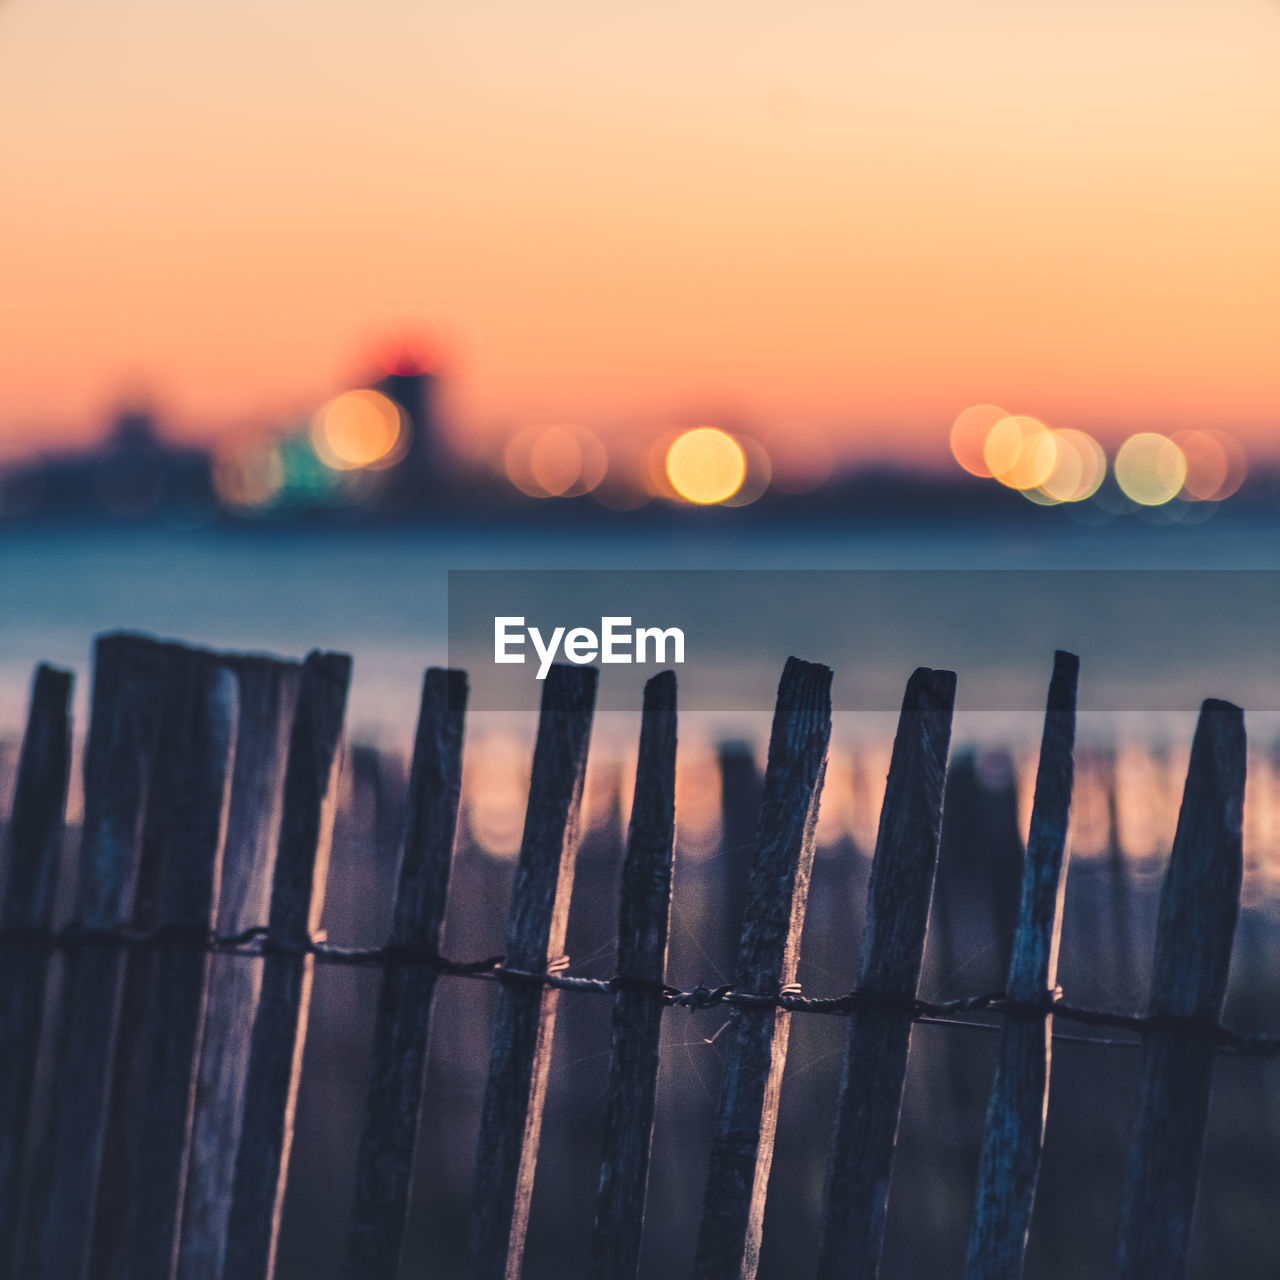 sunset, sky, reflection, sunlight, nature, water, no people, fence, dusk, sea, horizon, sun, tranquility, evening, outdoors, twilight, architecture, beauty in nature, scenics - nature, light, focus on foreground, land, orange color, close-up, urban skyline, security, landscape, blue, tranquil scene, protection